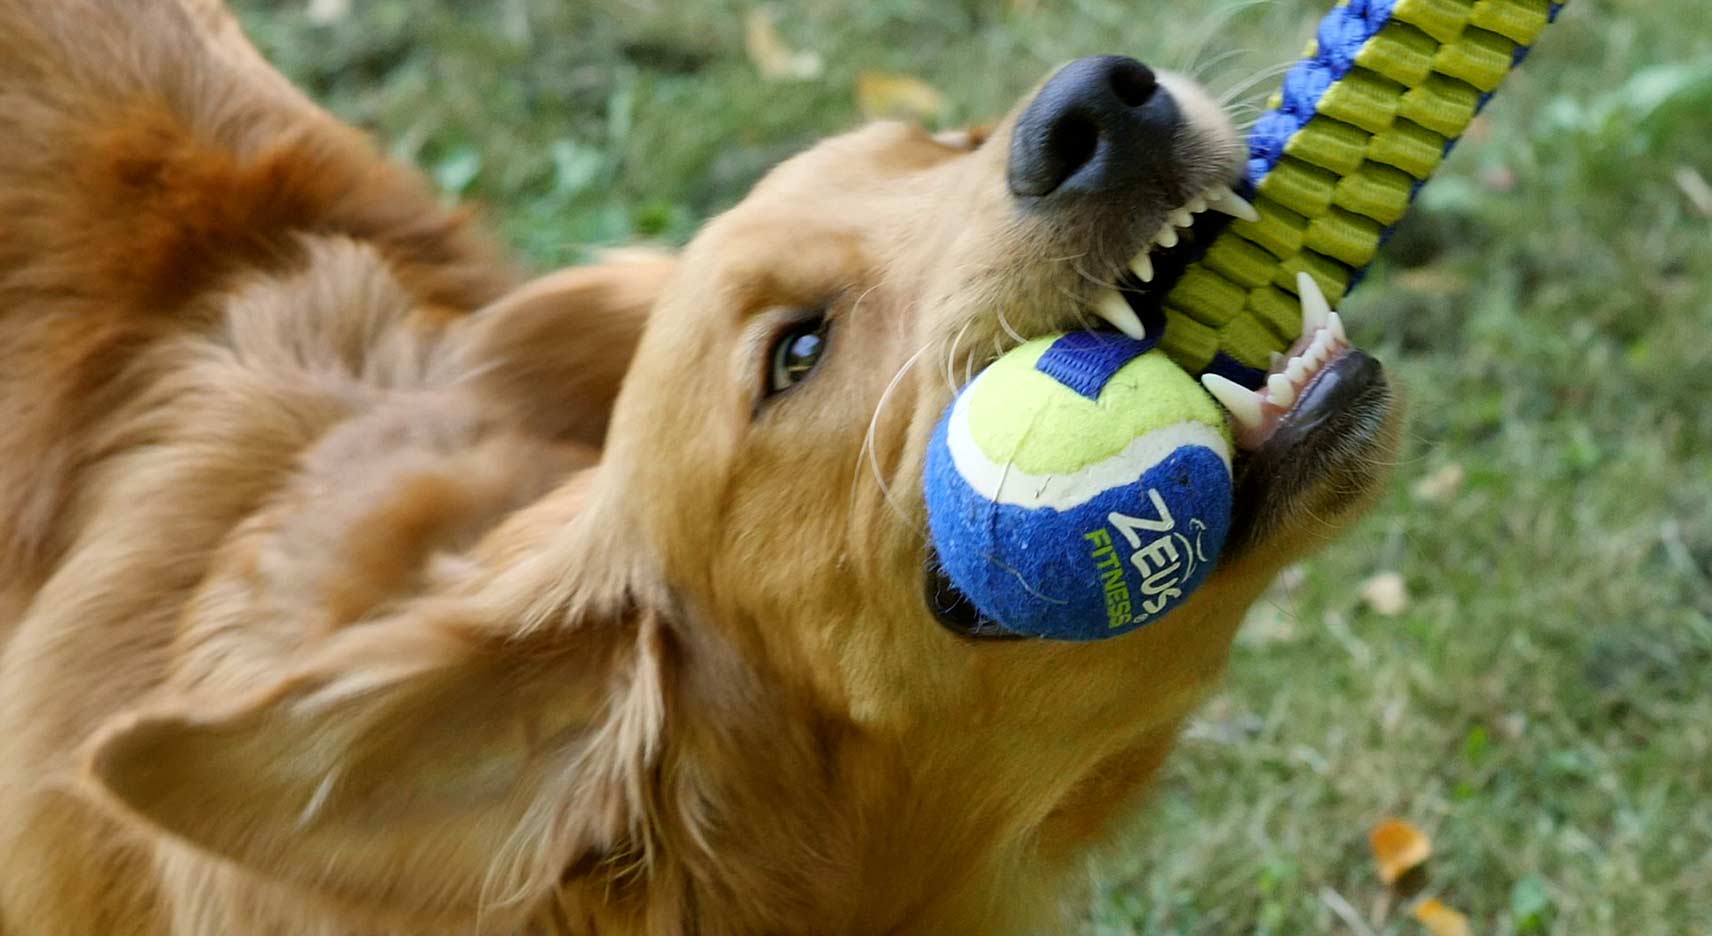 How to make tug-of-war with your dog even more fun?